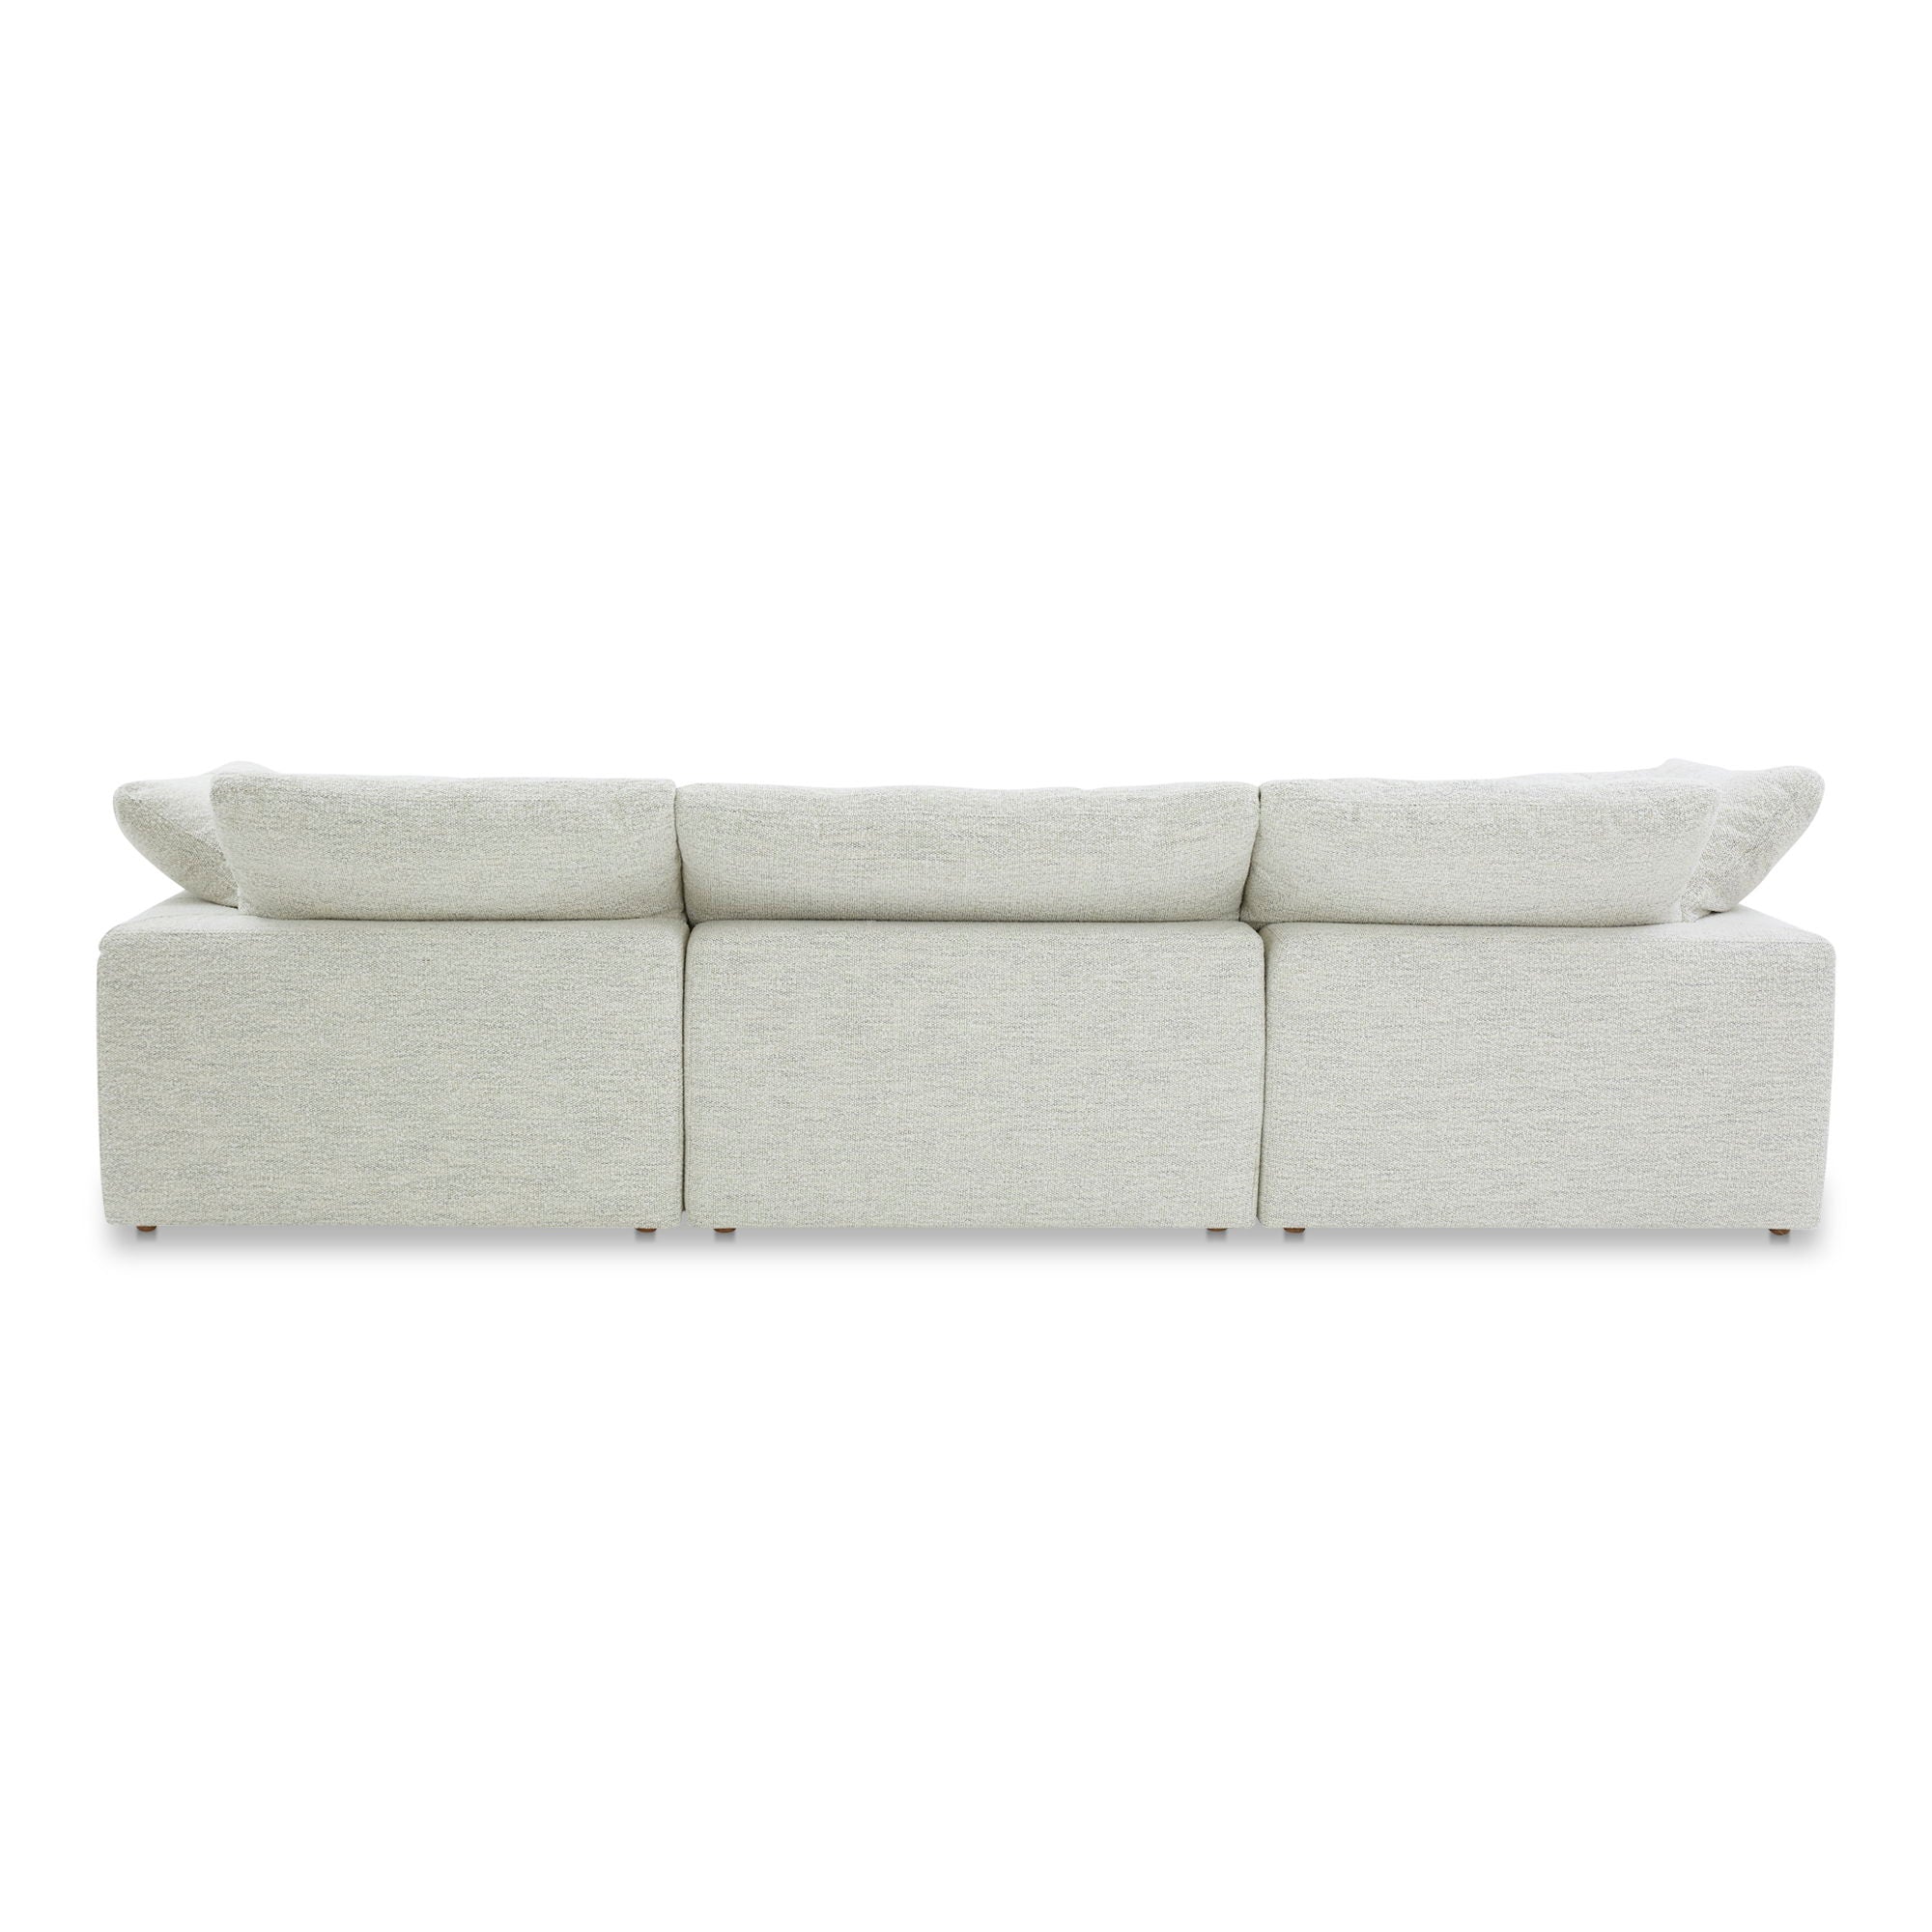 Clay - Modular Sofa Performance Fabric - Sand-Stationary Sectionals-American Furniture Outlet